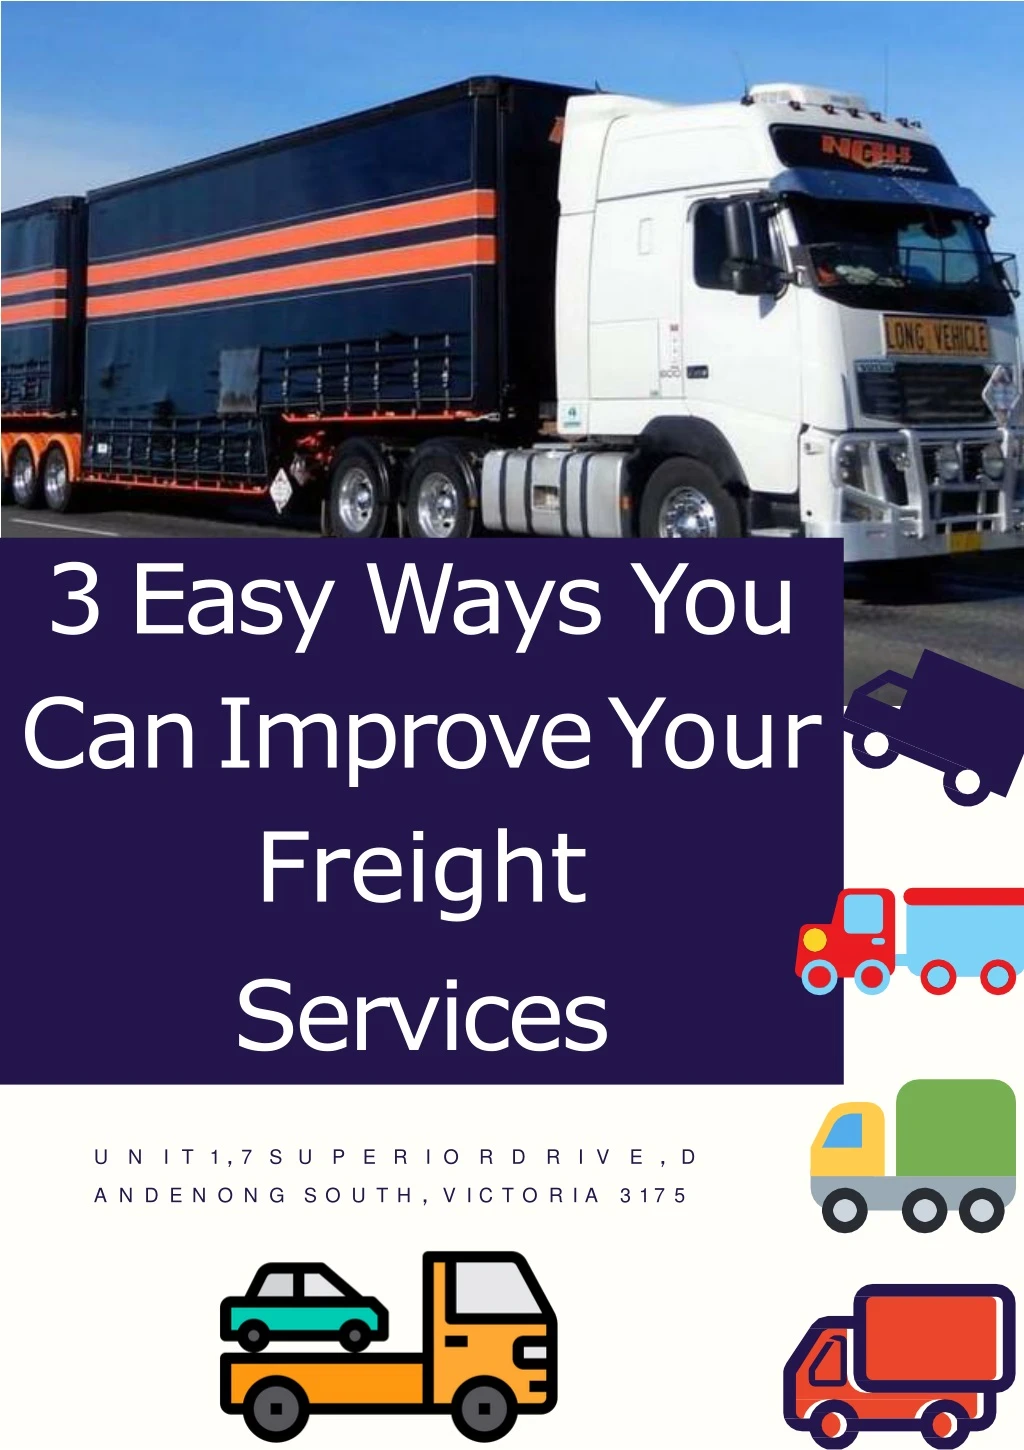 3 easy ways you can improve your freight services